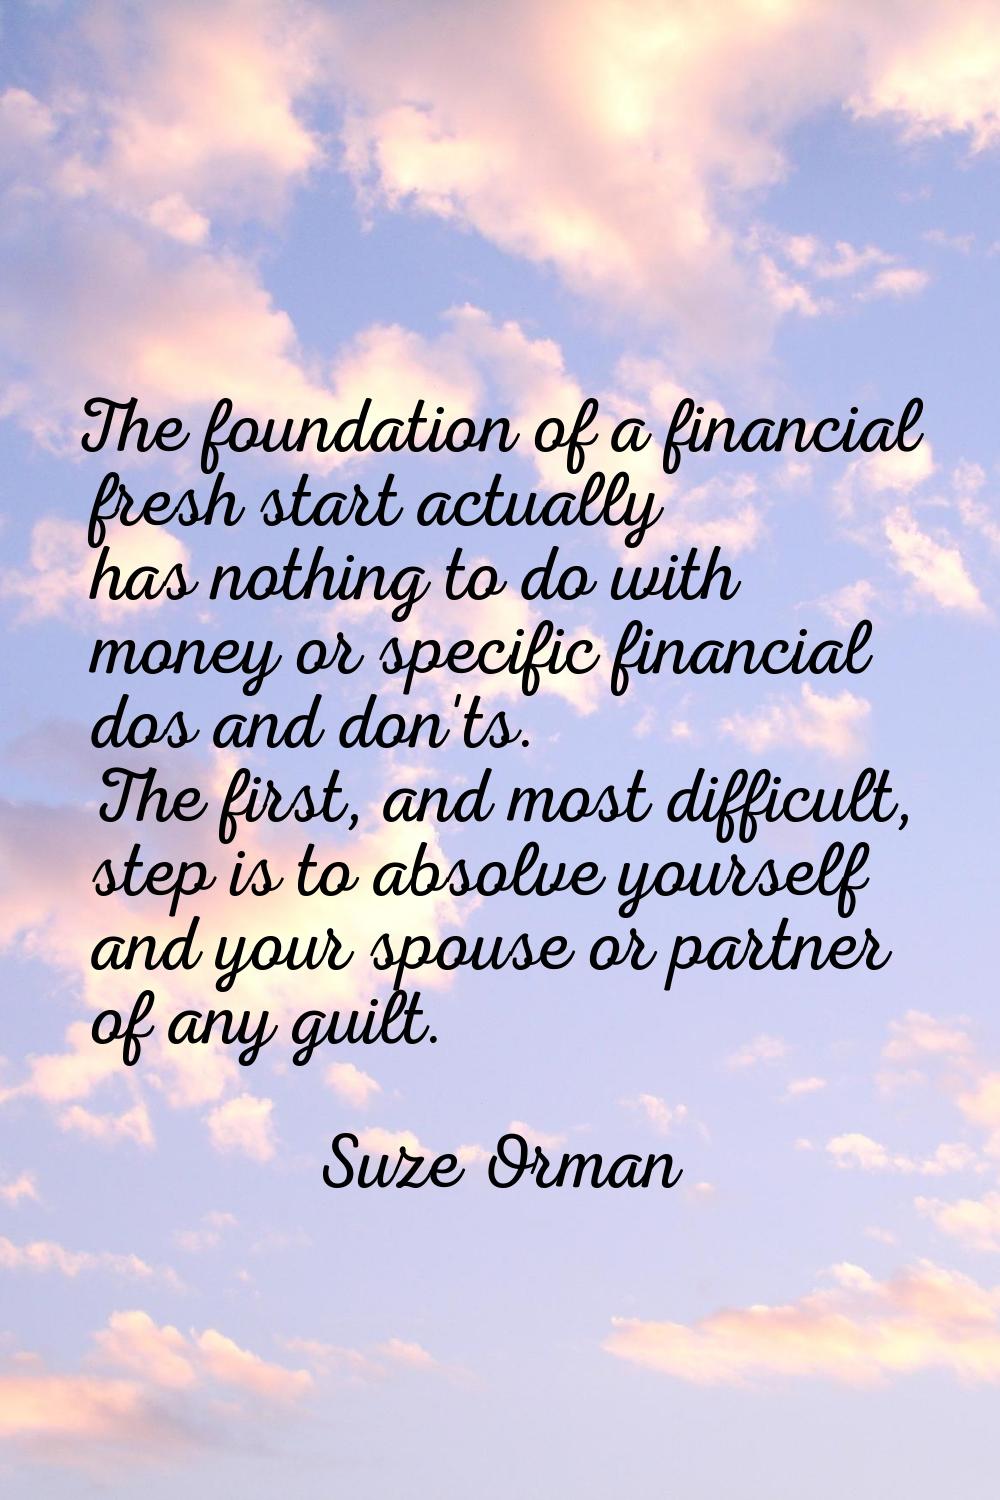 The foundation of a financial fresh start actually has nothing to do with money or specific financi